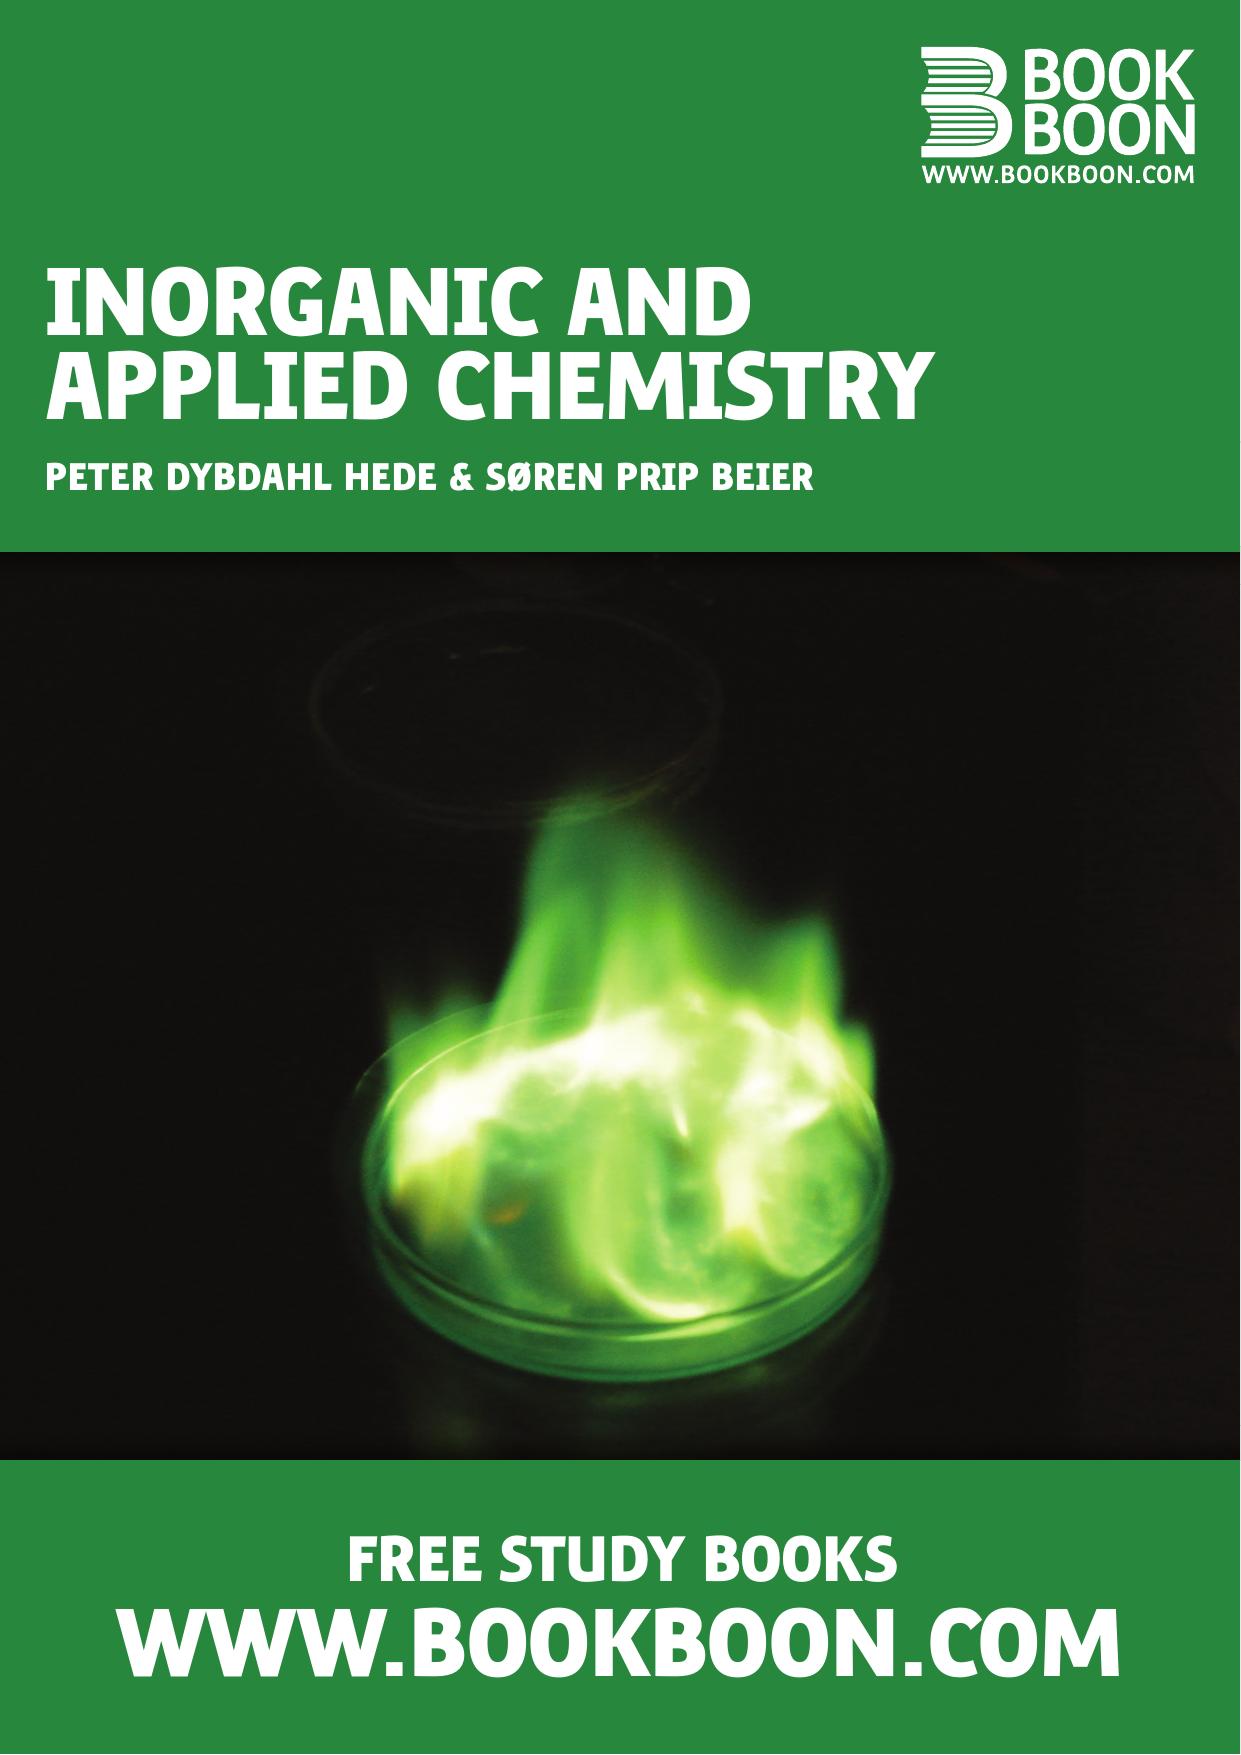 Inorganic and Applied Chemistry